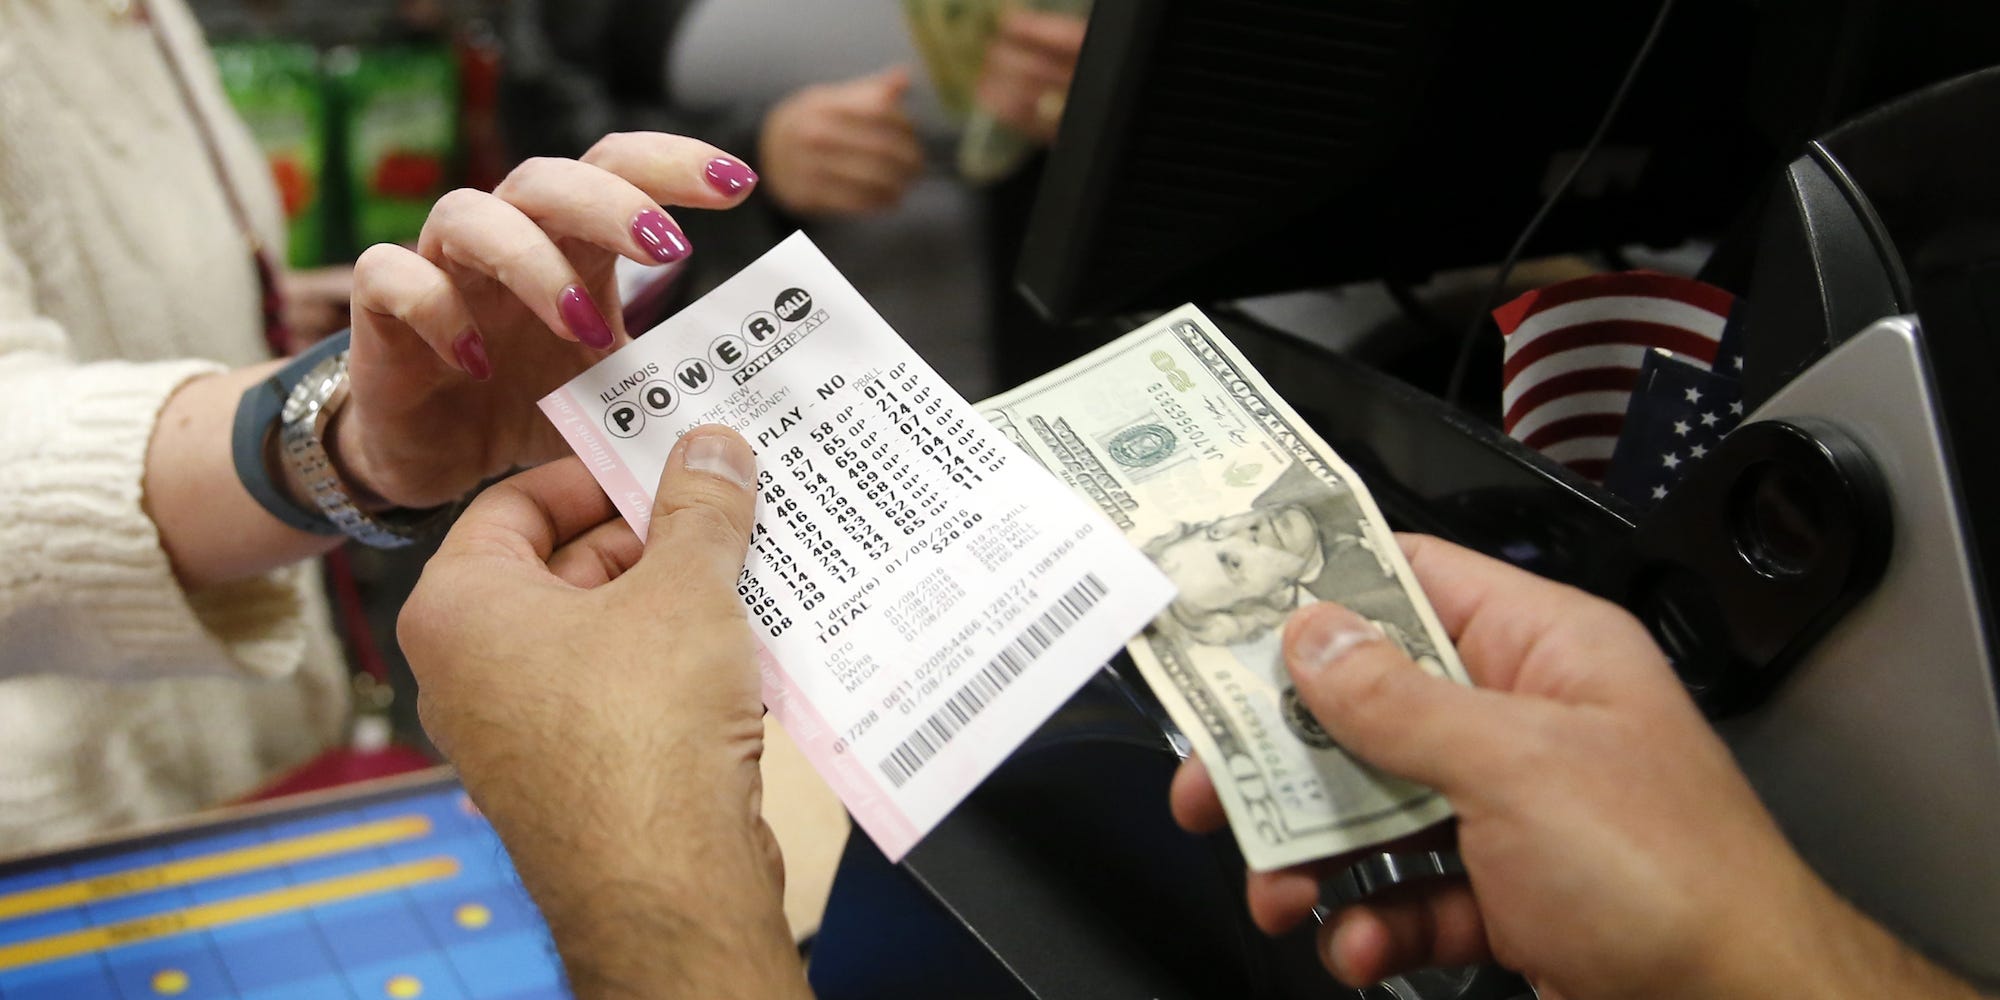 A New York lawyer swindled lottery winners out of $107 milli